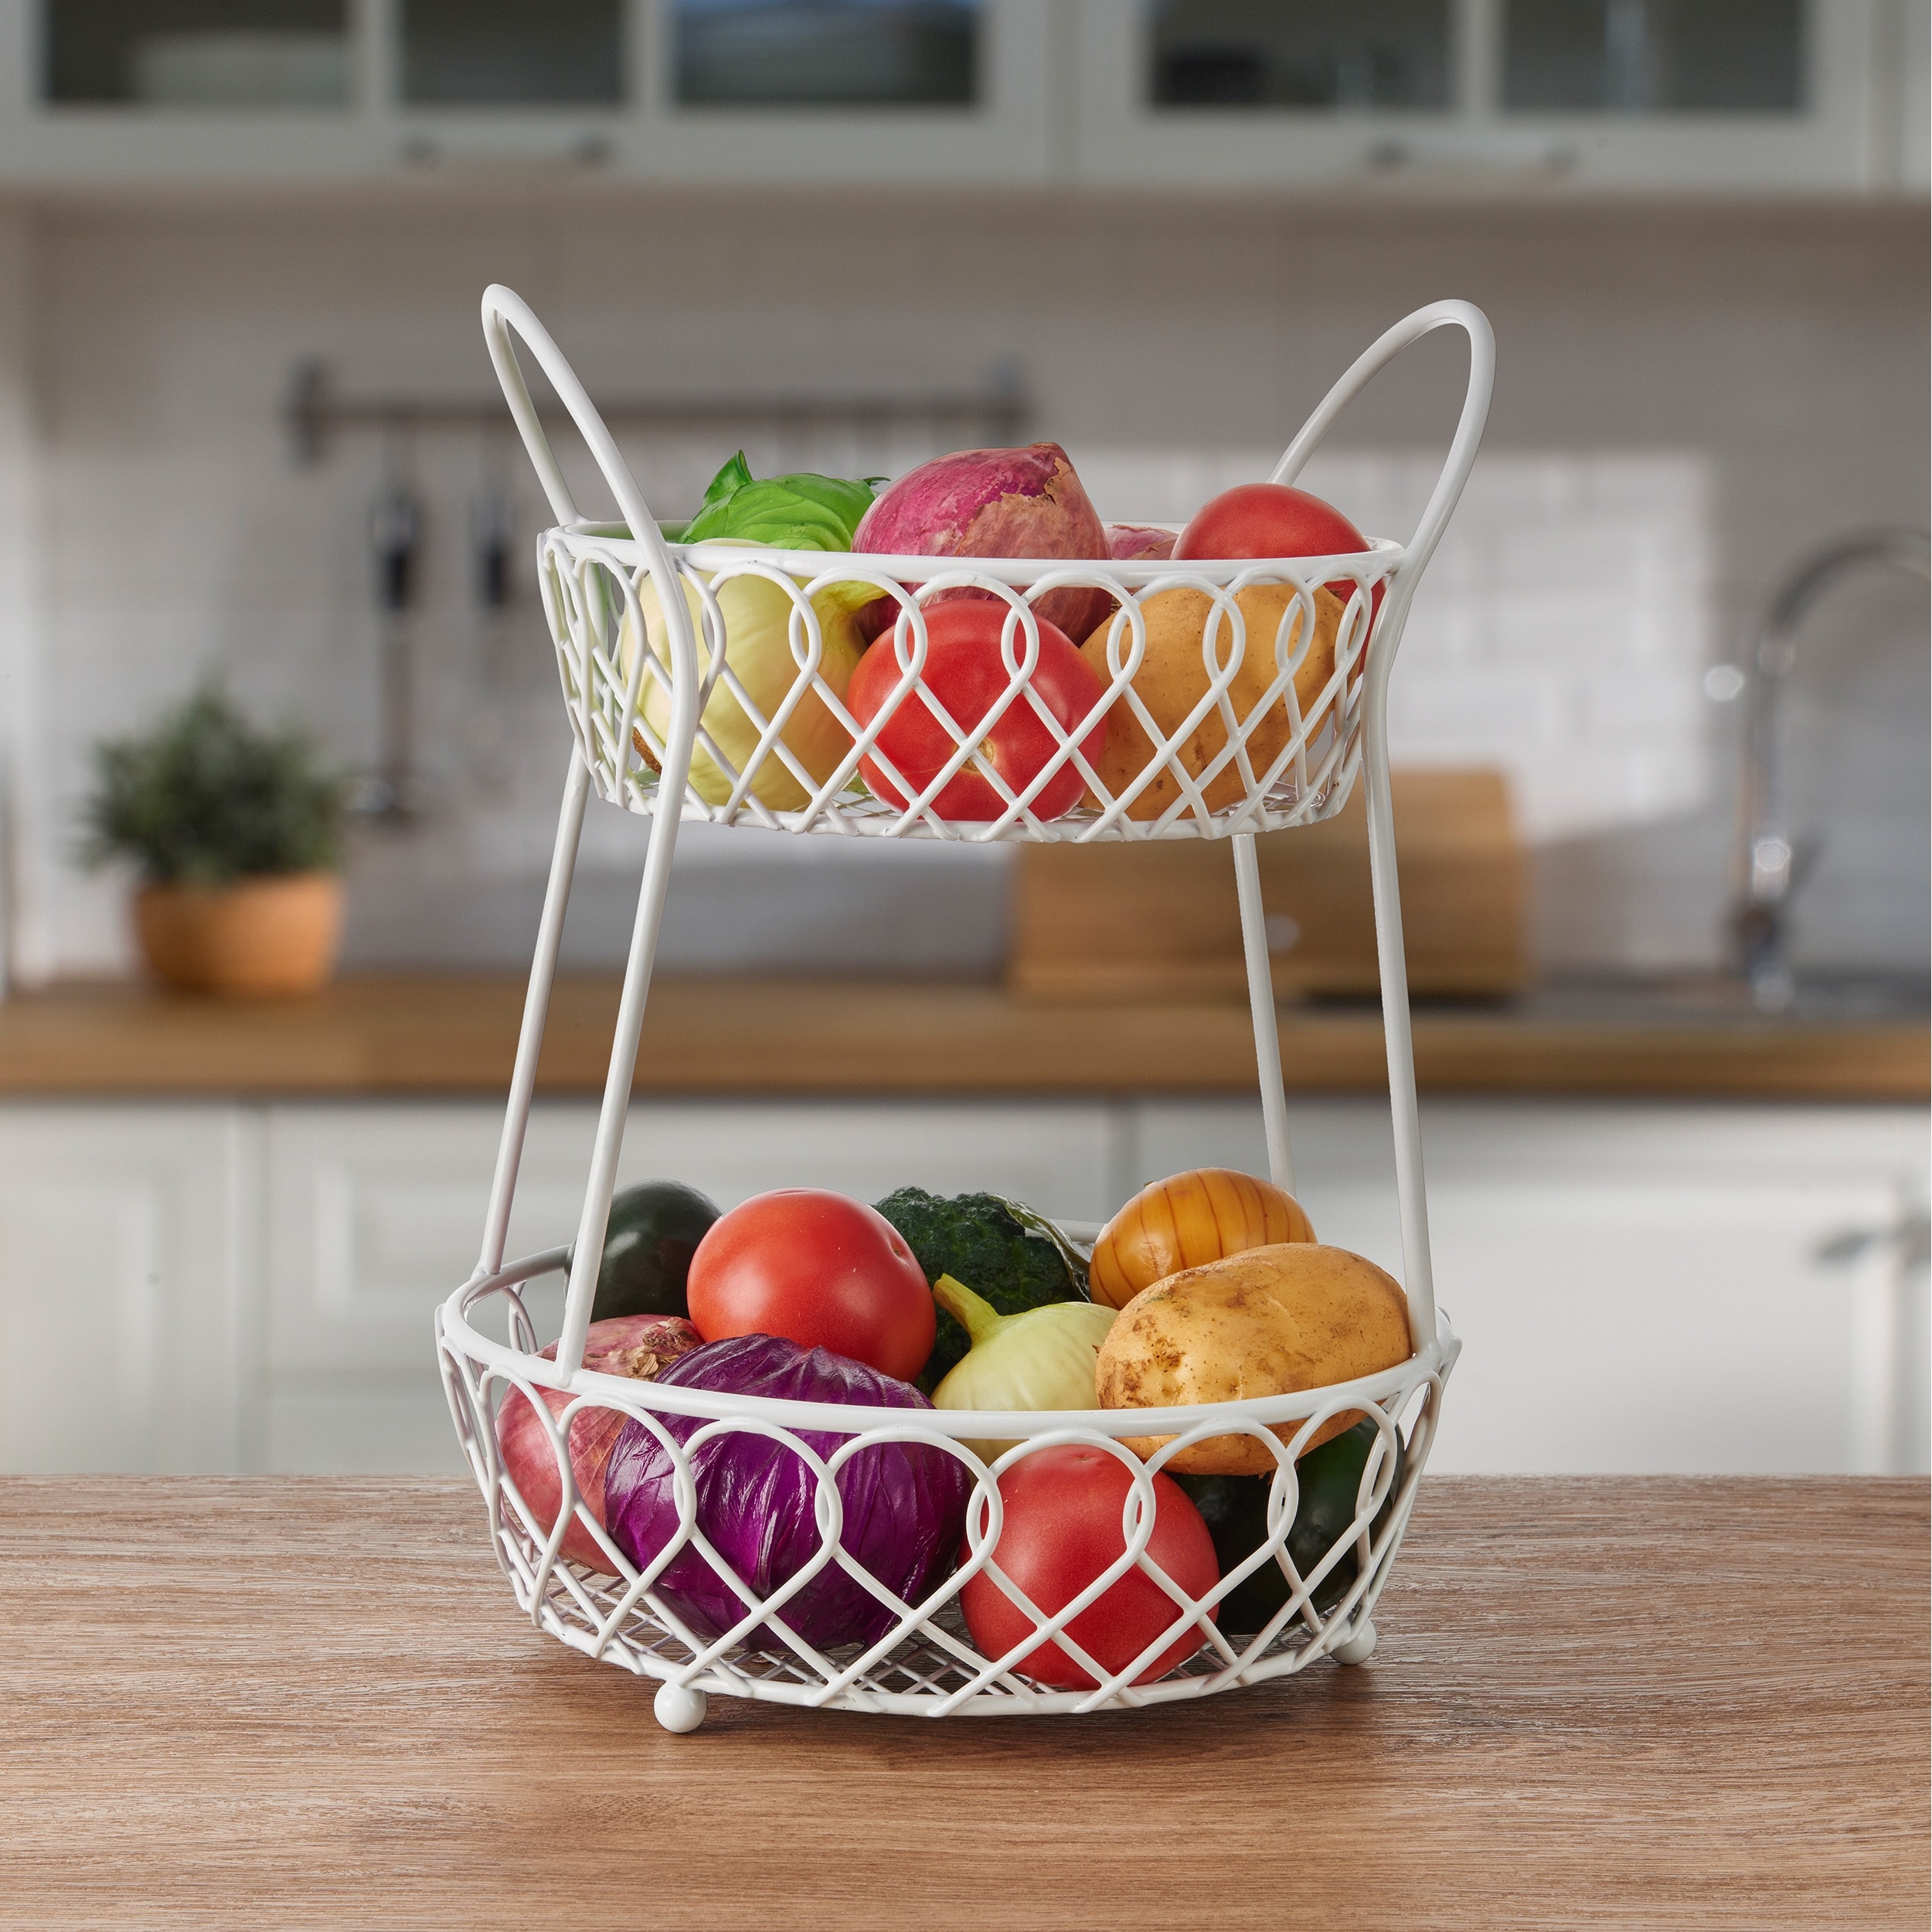 https://ak1.ostkcdn.com/images/products/is/images/direct/6ed60788067ea560797f31627f4d7a3bf95a19a2/Gourmet-Basics-by-Mikasa-Loop-and-Lattice-White-2Tier-Basket.jpg